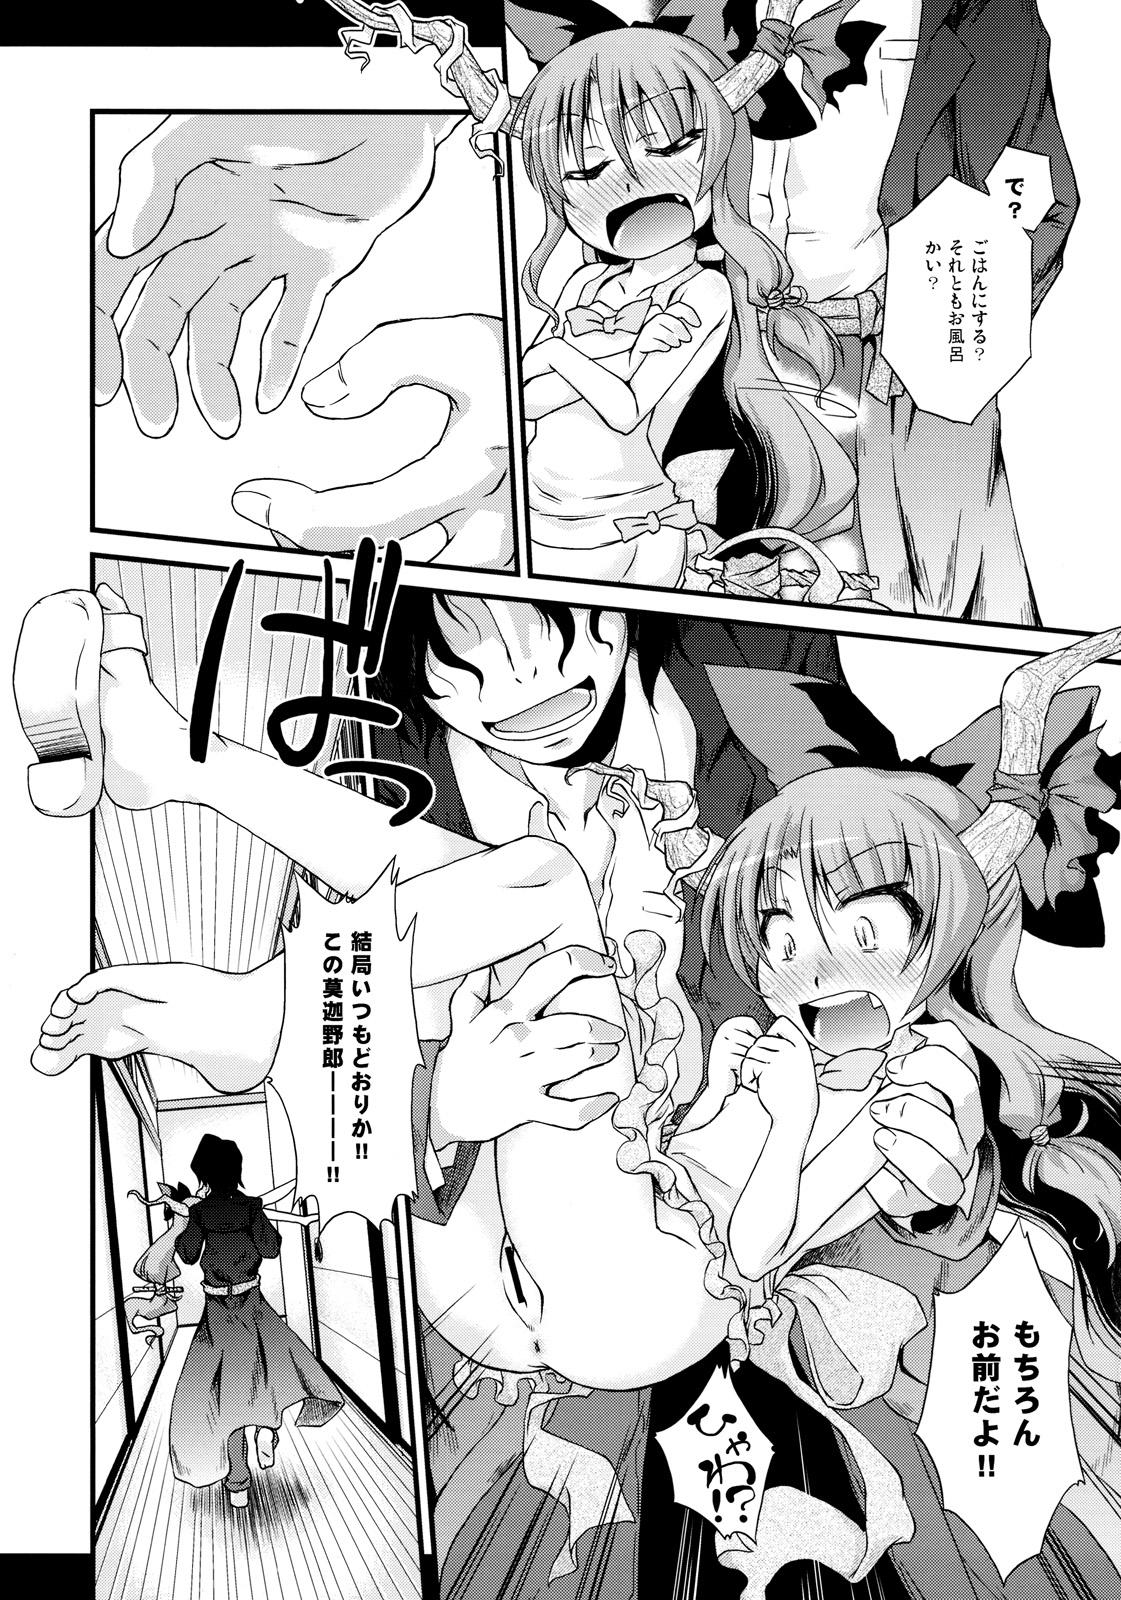 Russia Kyoujun Outbreak - Touhou project Making Love Porn - Page 5